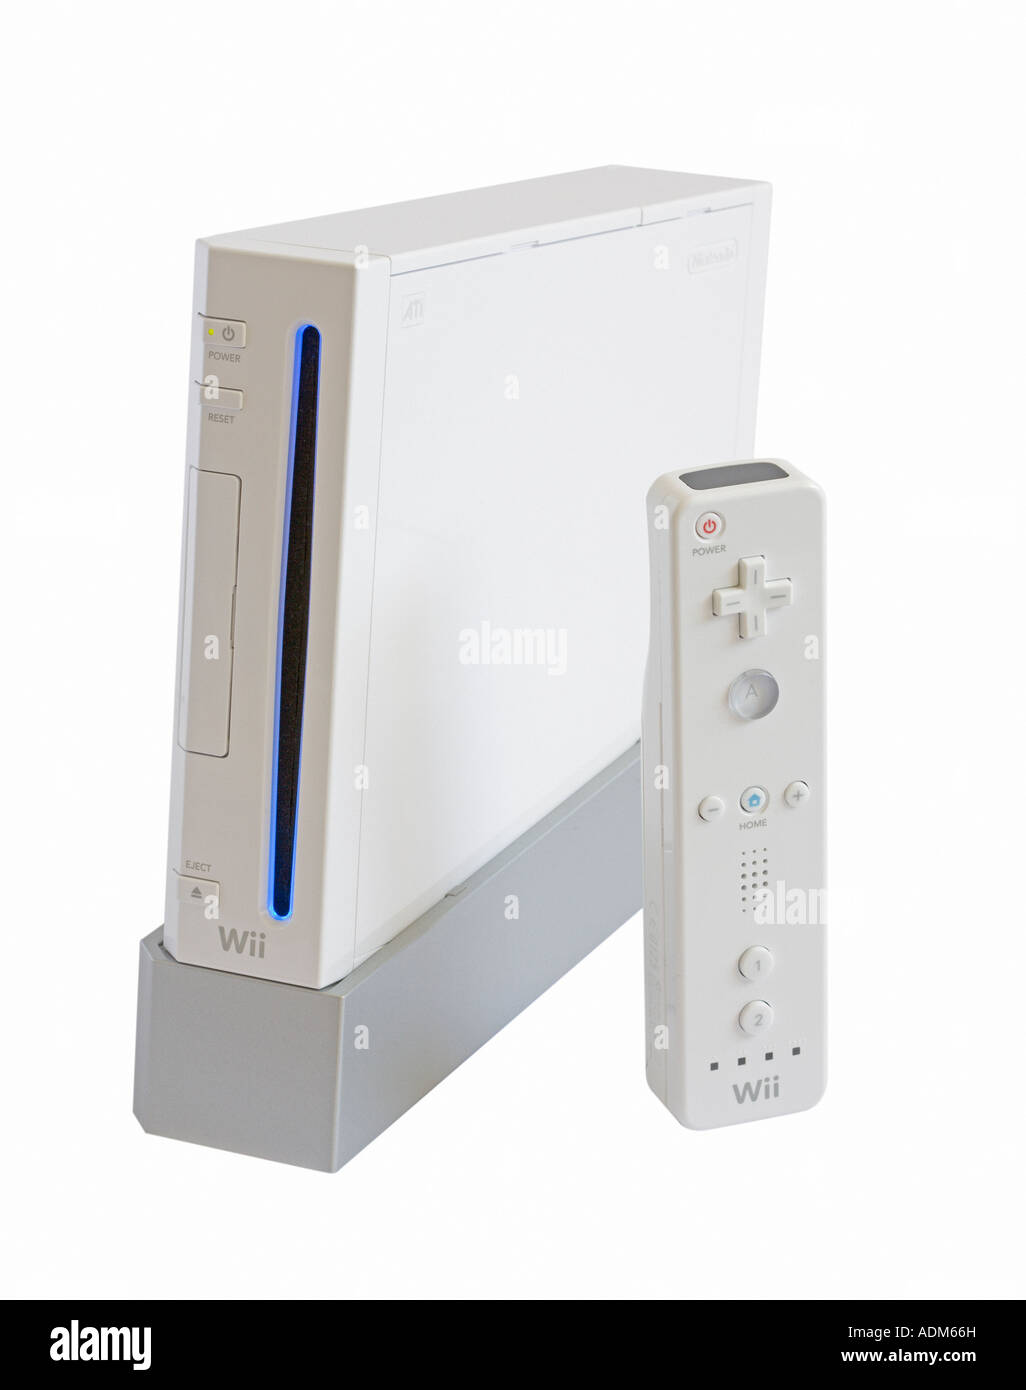 Nintendo Wii Console High Resolution Stock Photography And Images Alamy